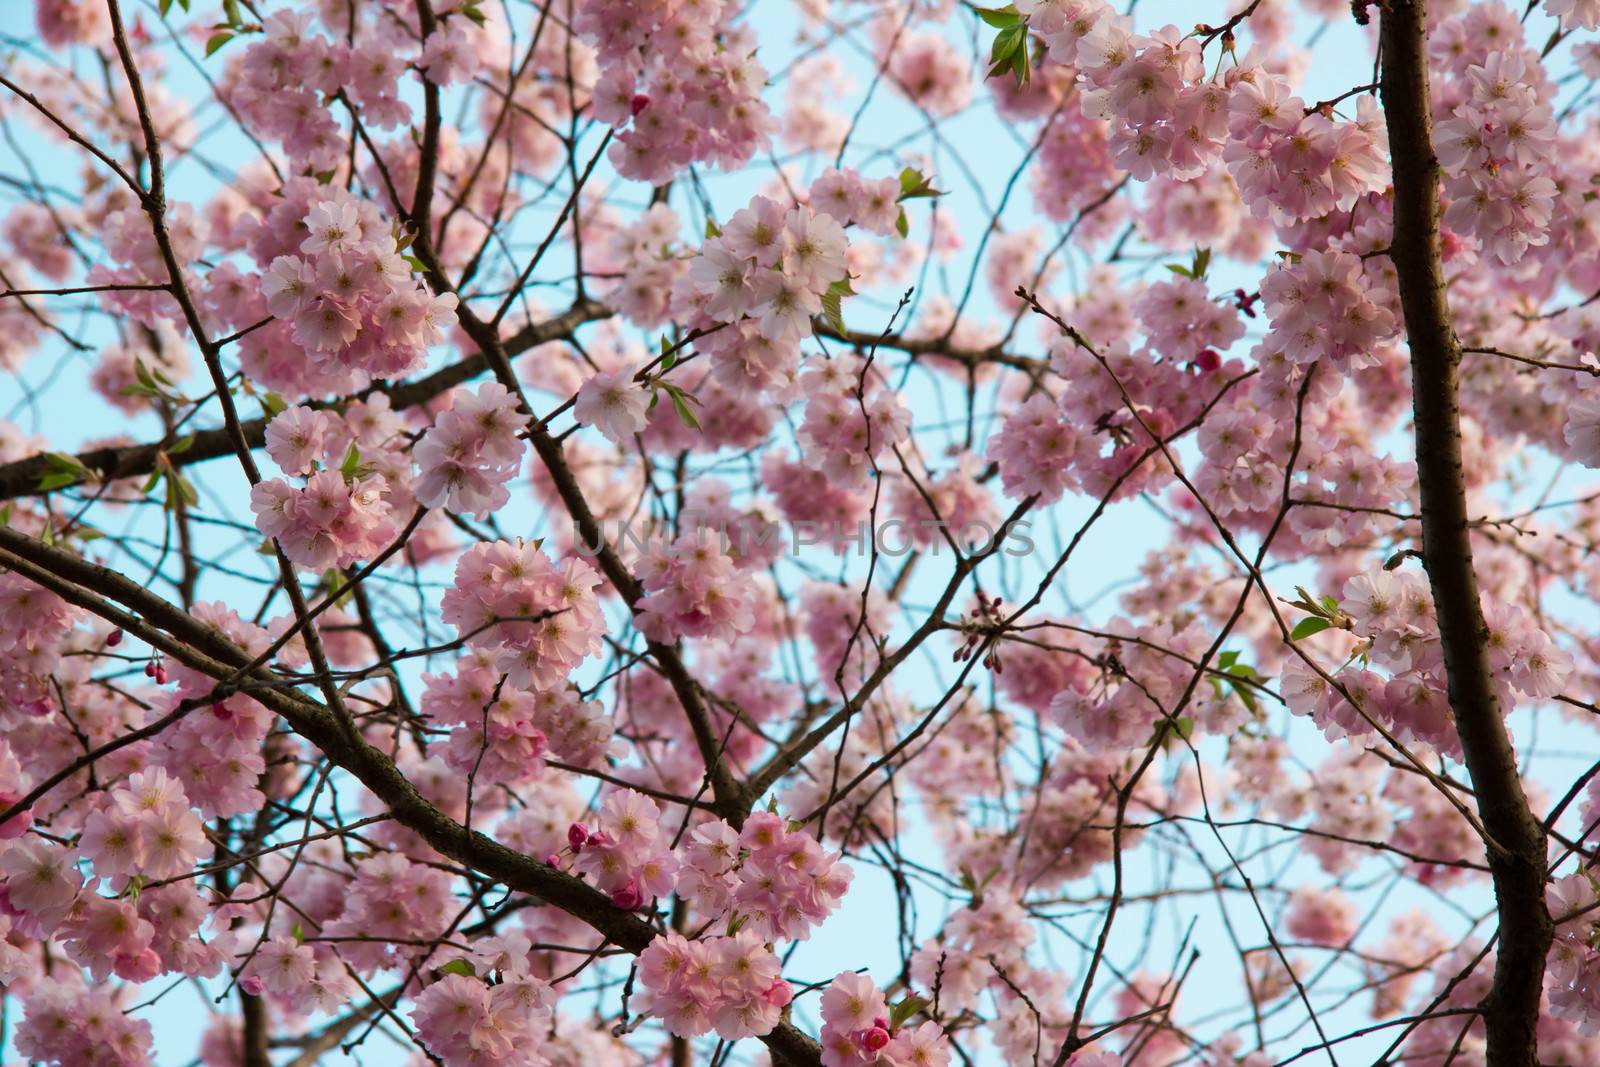 Blooming tree in spring with pink flowers by Tetyana